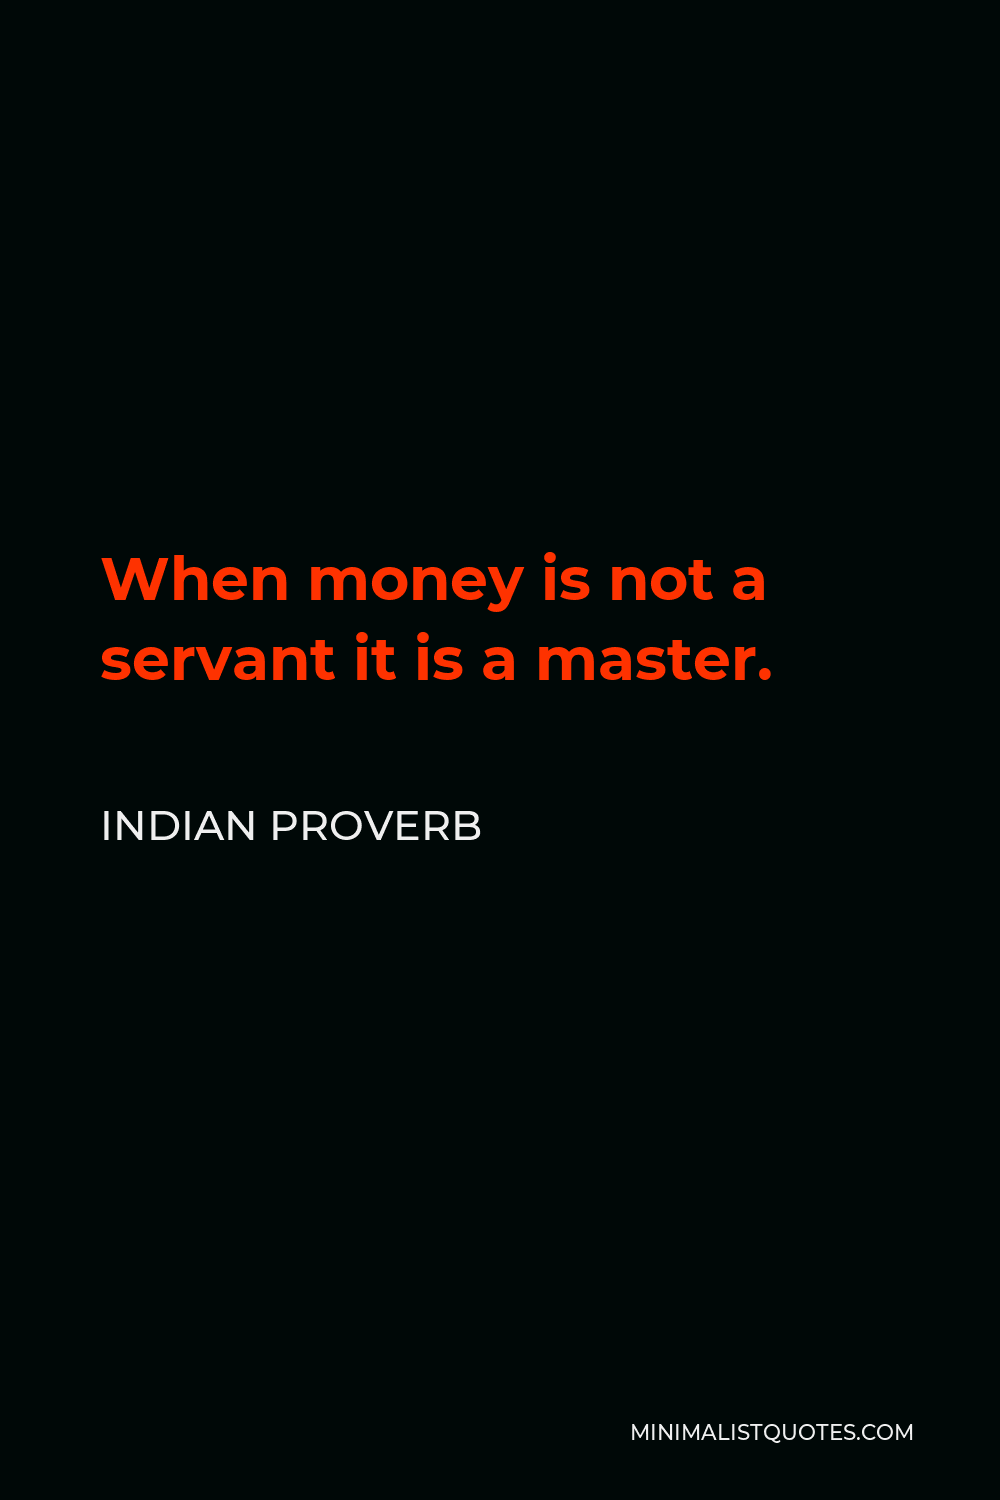 Indian Proverb Quote - When money is not a servant it is a master.